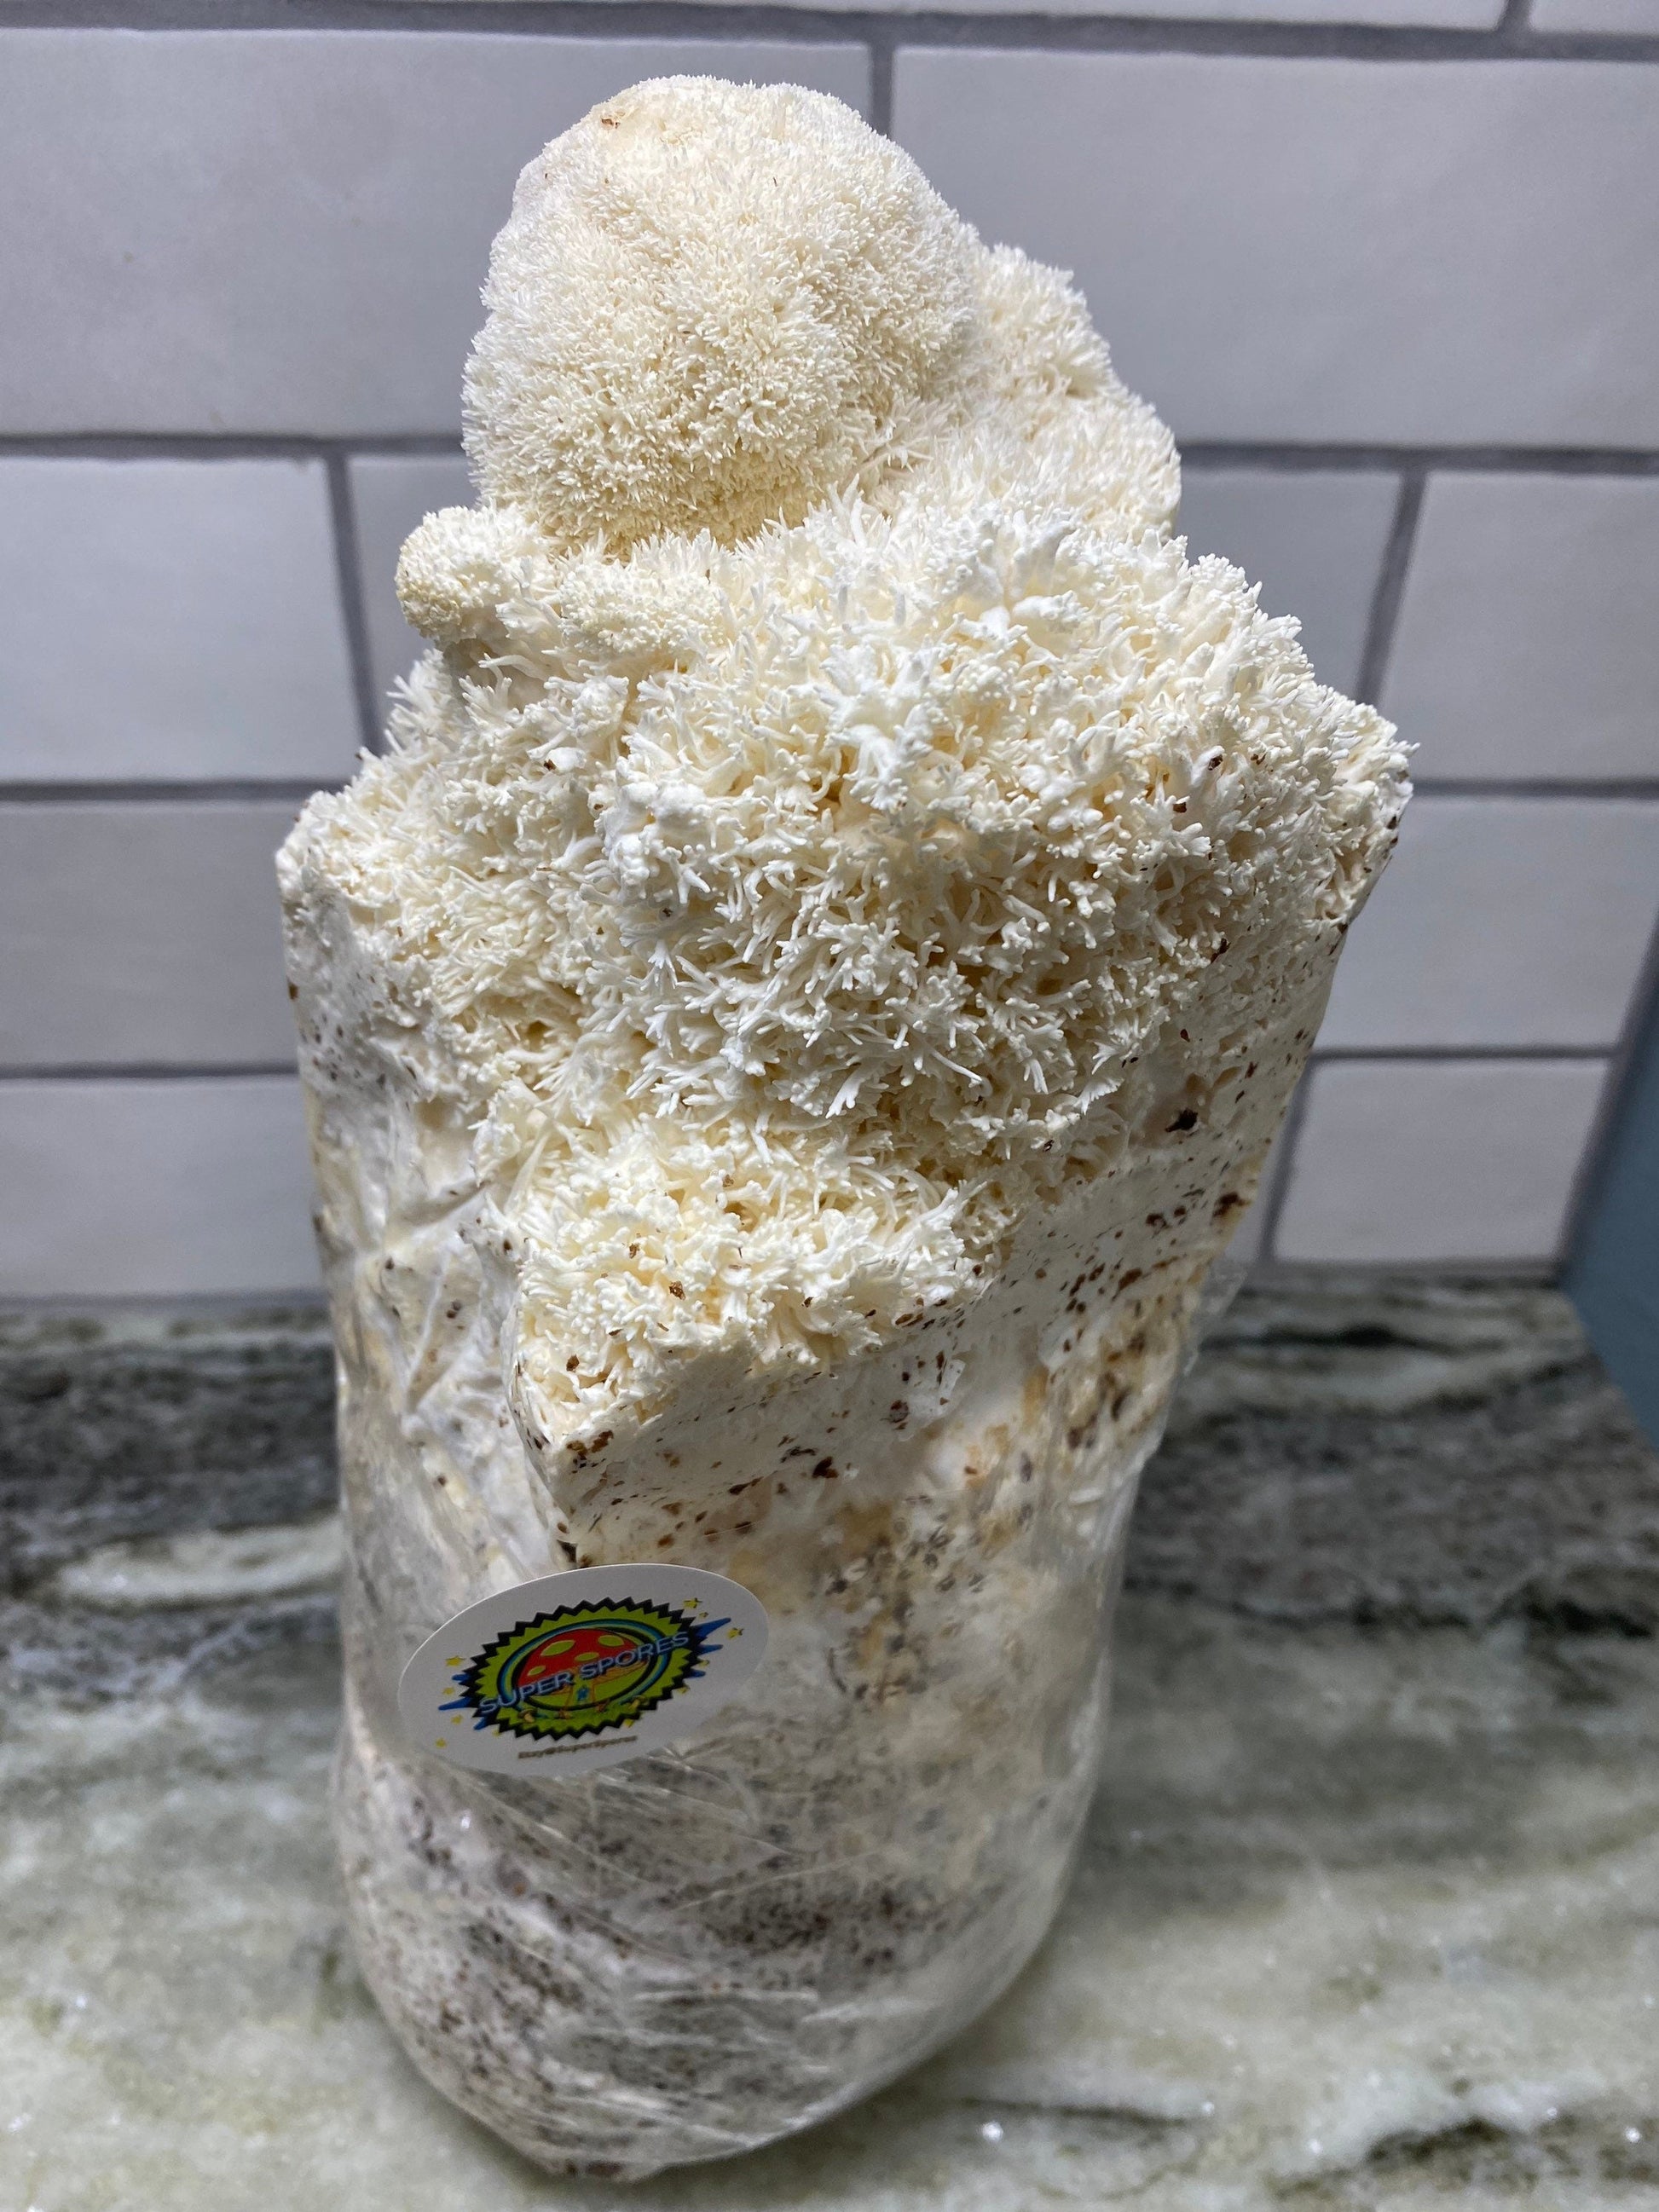 MUSHROOM GRAIN 2x2 lbs. (2) Sterilized Grain Spawn With Supplemented Oak Substrate (TWO 2 Pound Organic White Millet Seed With Supplemented Oak Substrate) - DukeCityHerbs